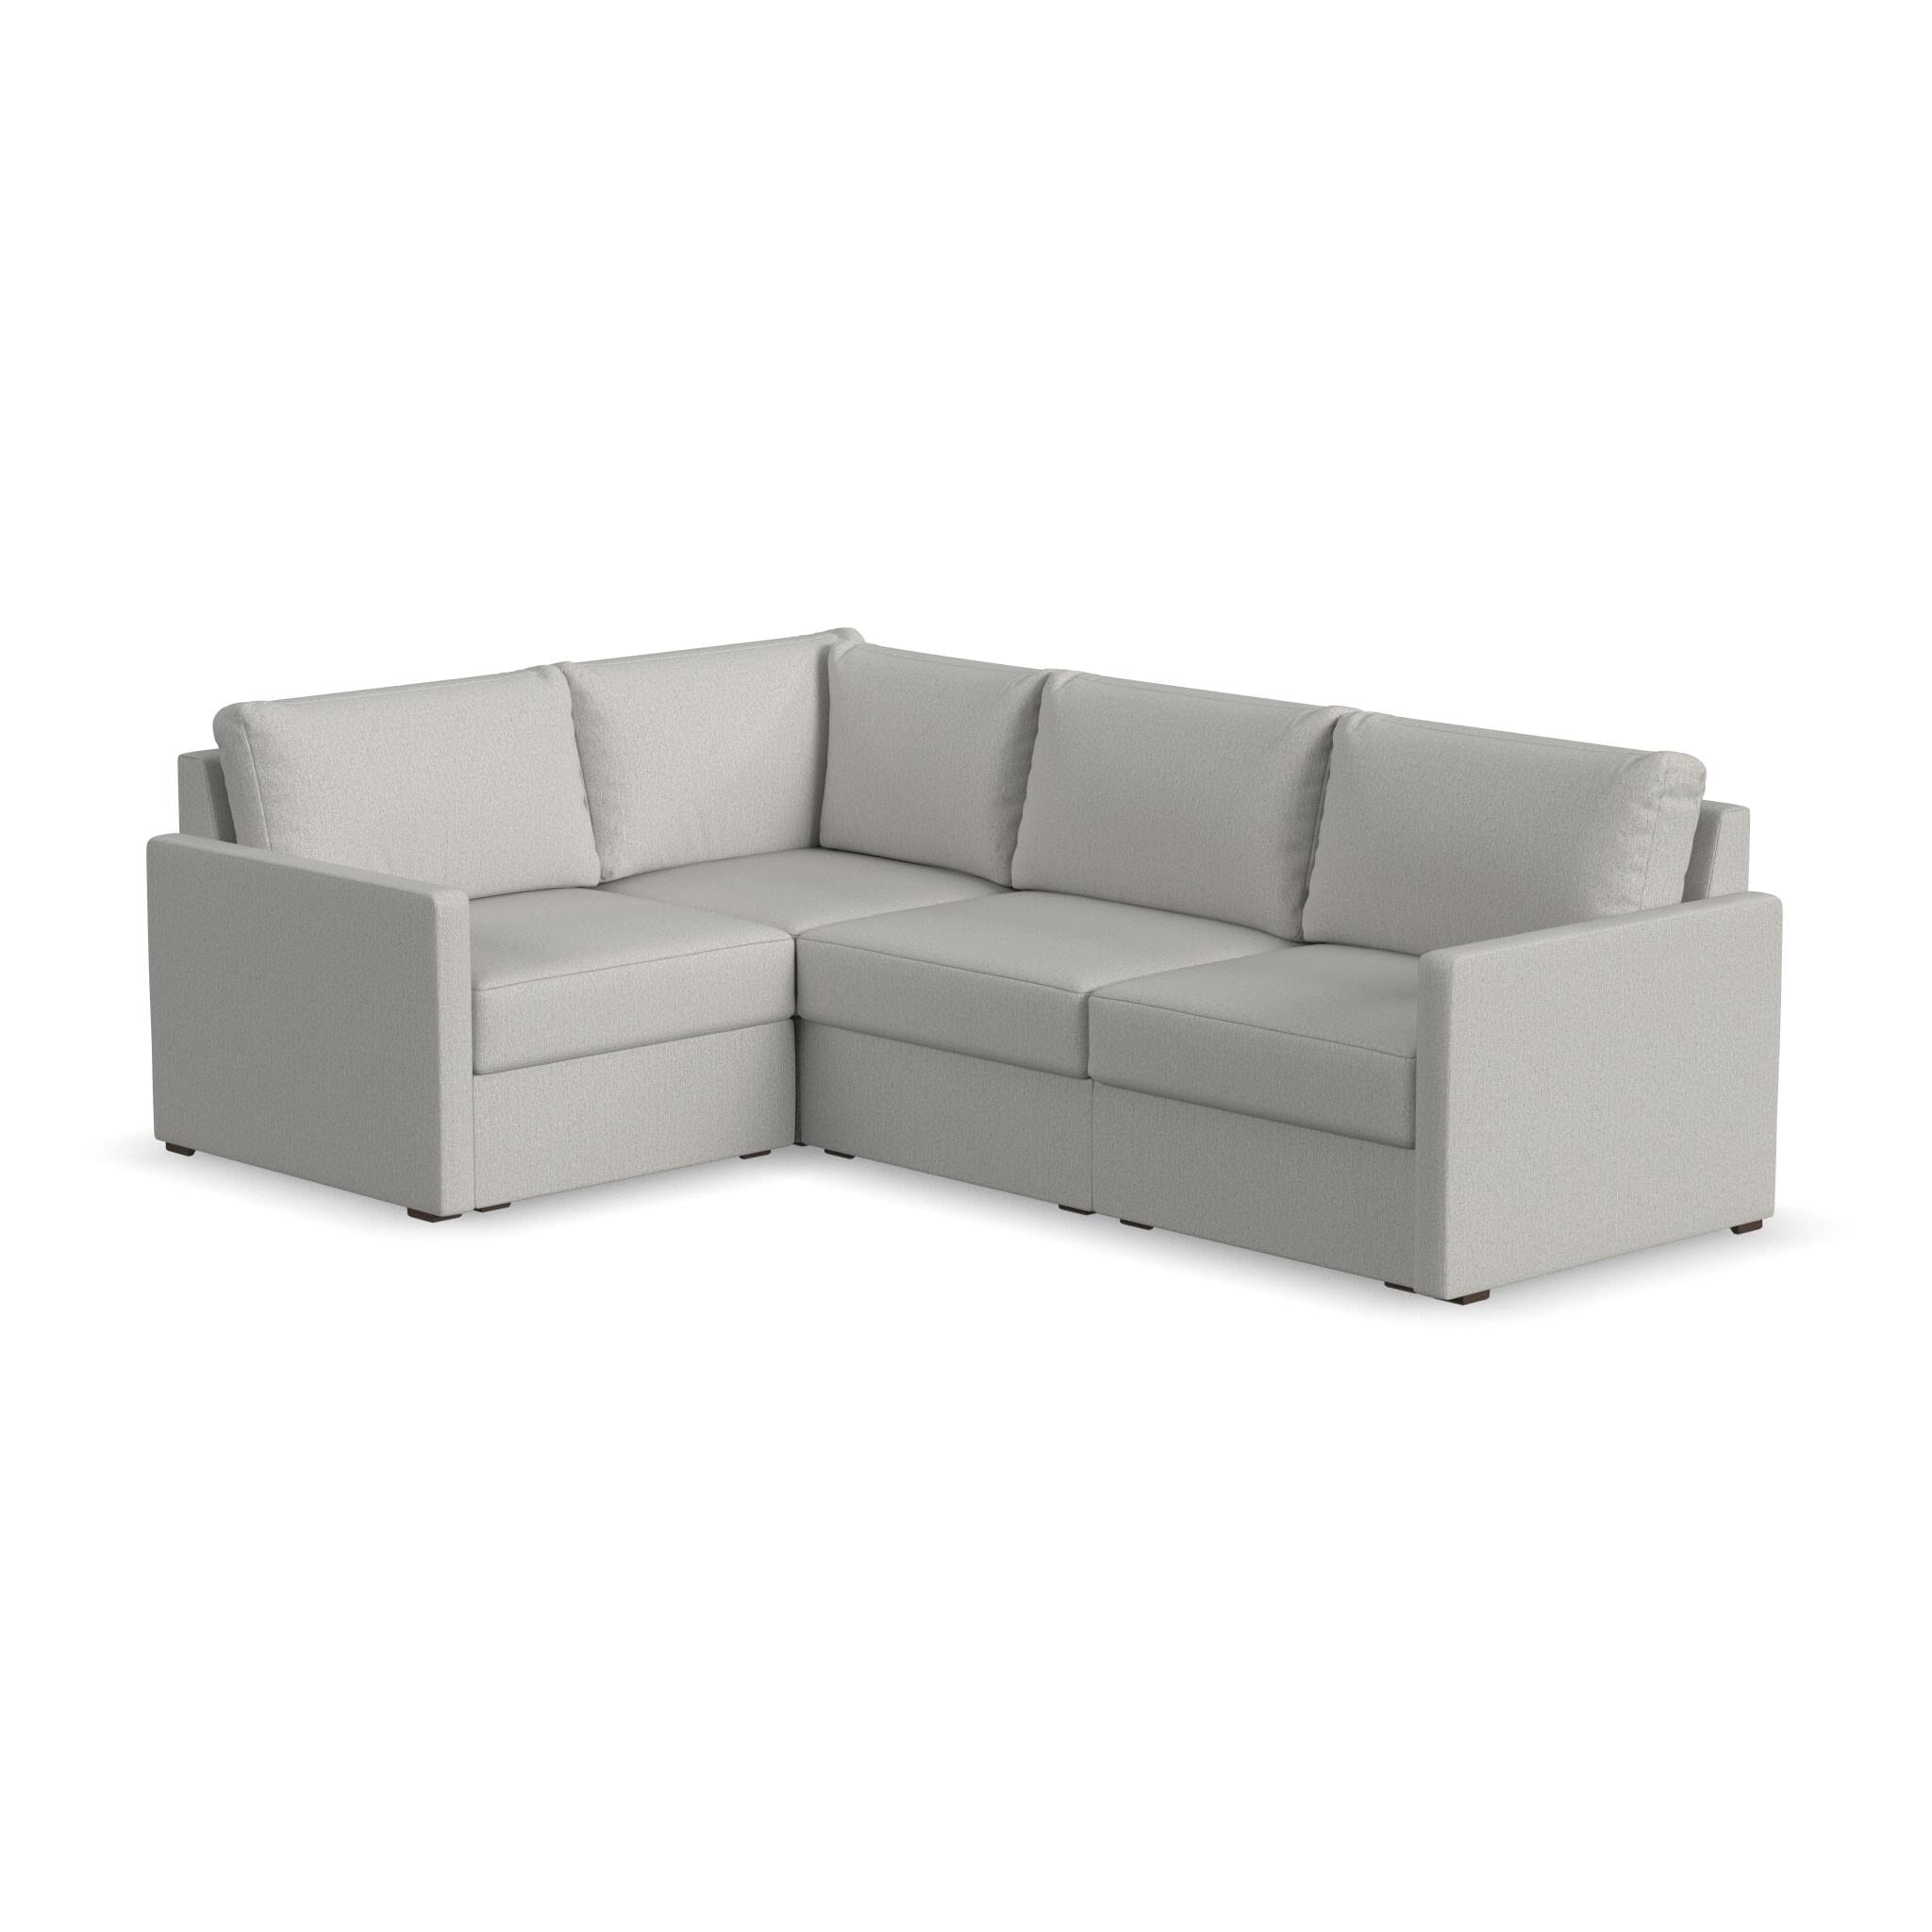 Traditional 4-Seat Sectional with Narrow Arm By Flex Sectional Flex